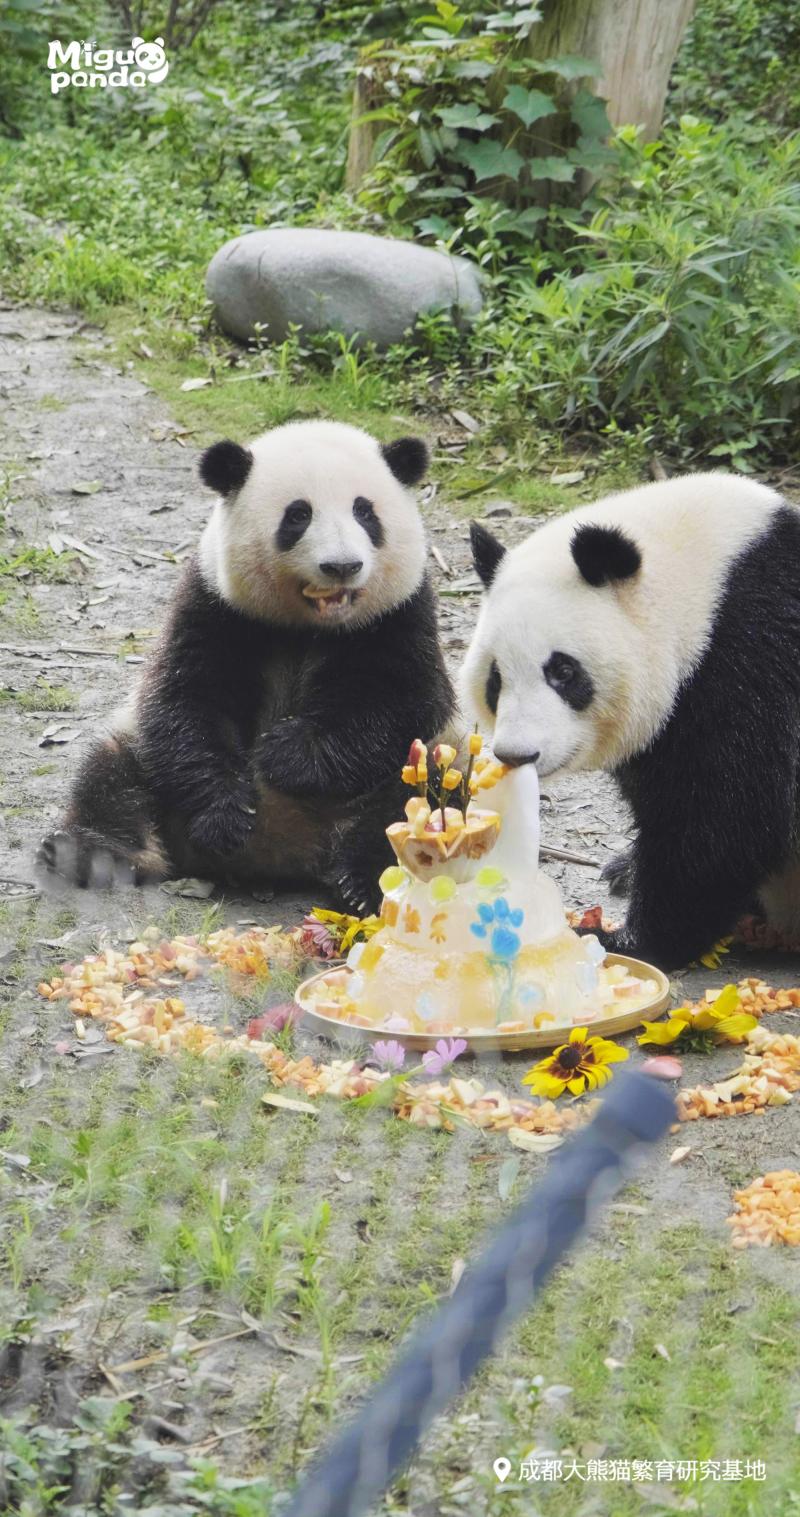 Happy birthday to the three "little bear friends". Giant pandas Menglan, Huahua, and Heye celebrate their birthday in China on the same day. | Cake | Huahua | Zoo | Beijing | Menglan | Birthday | Giant Panda